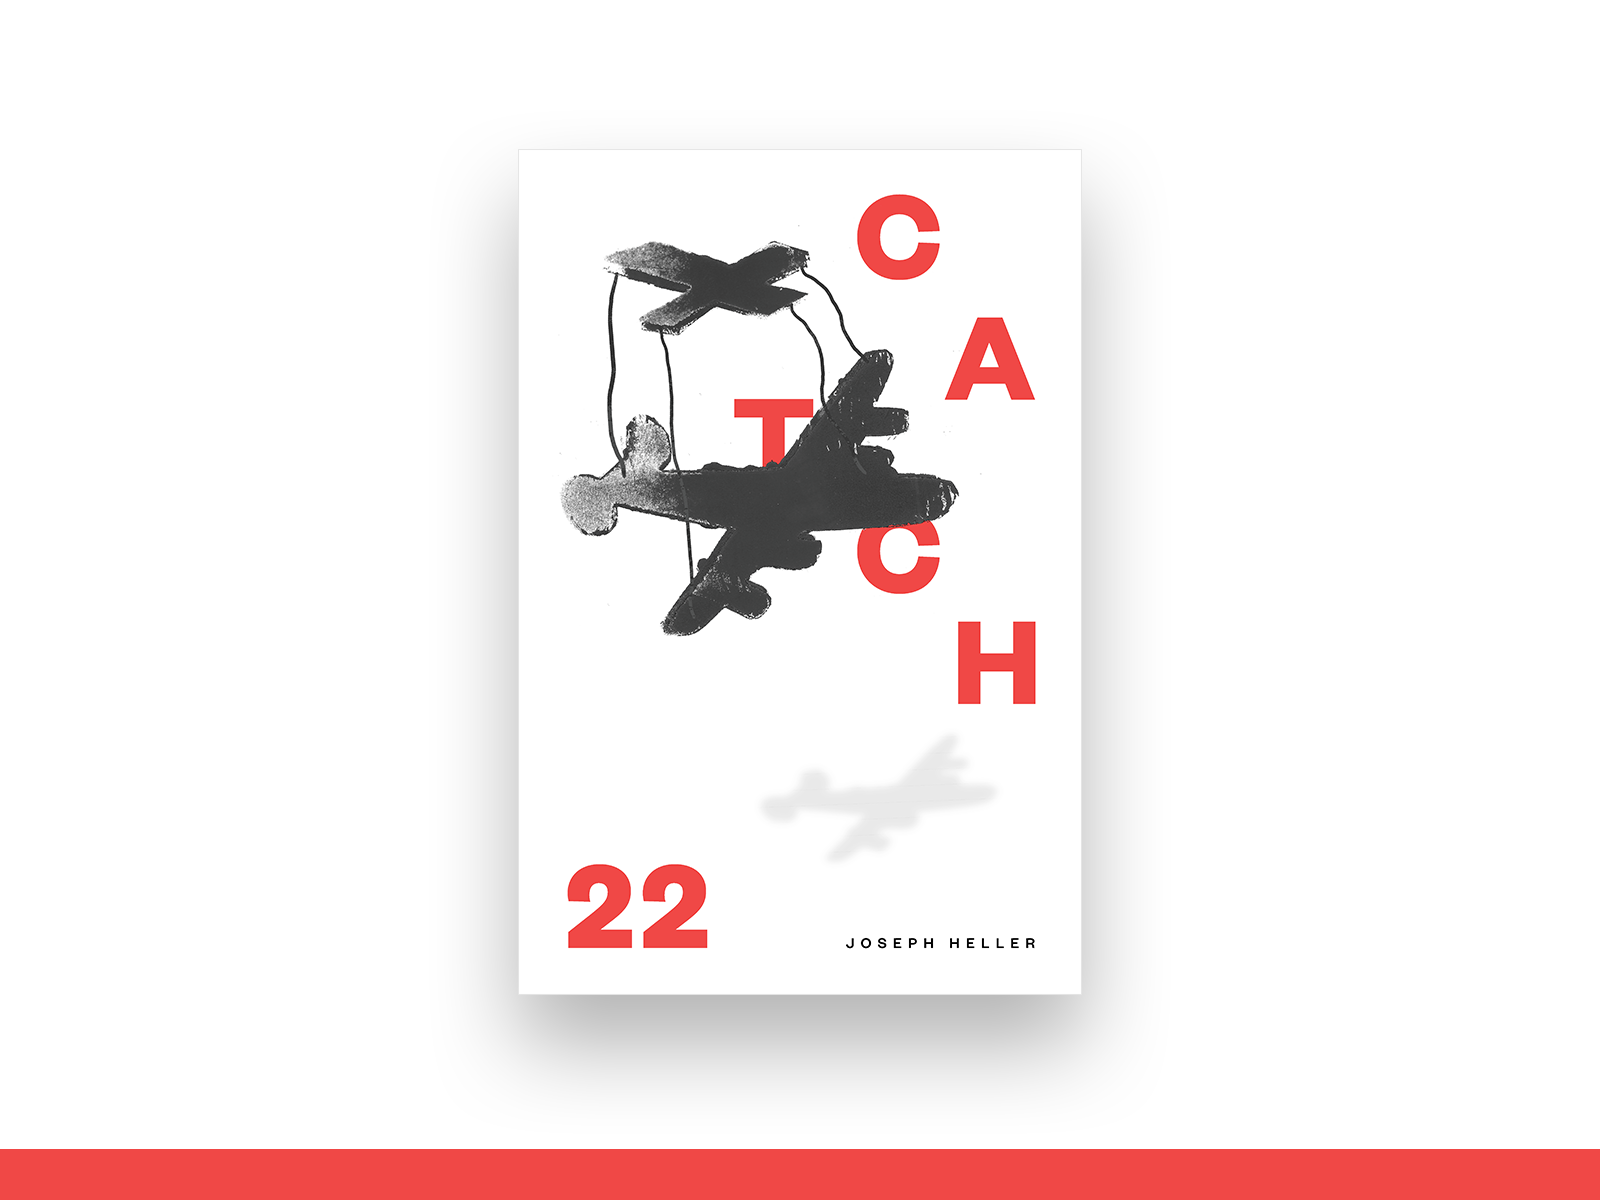 catch 22 book explained